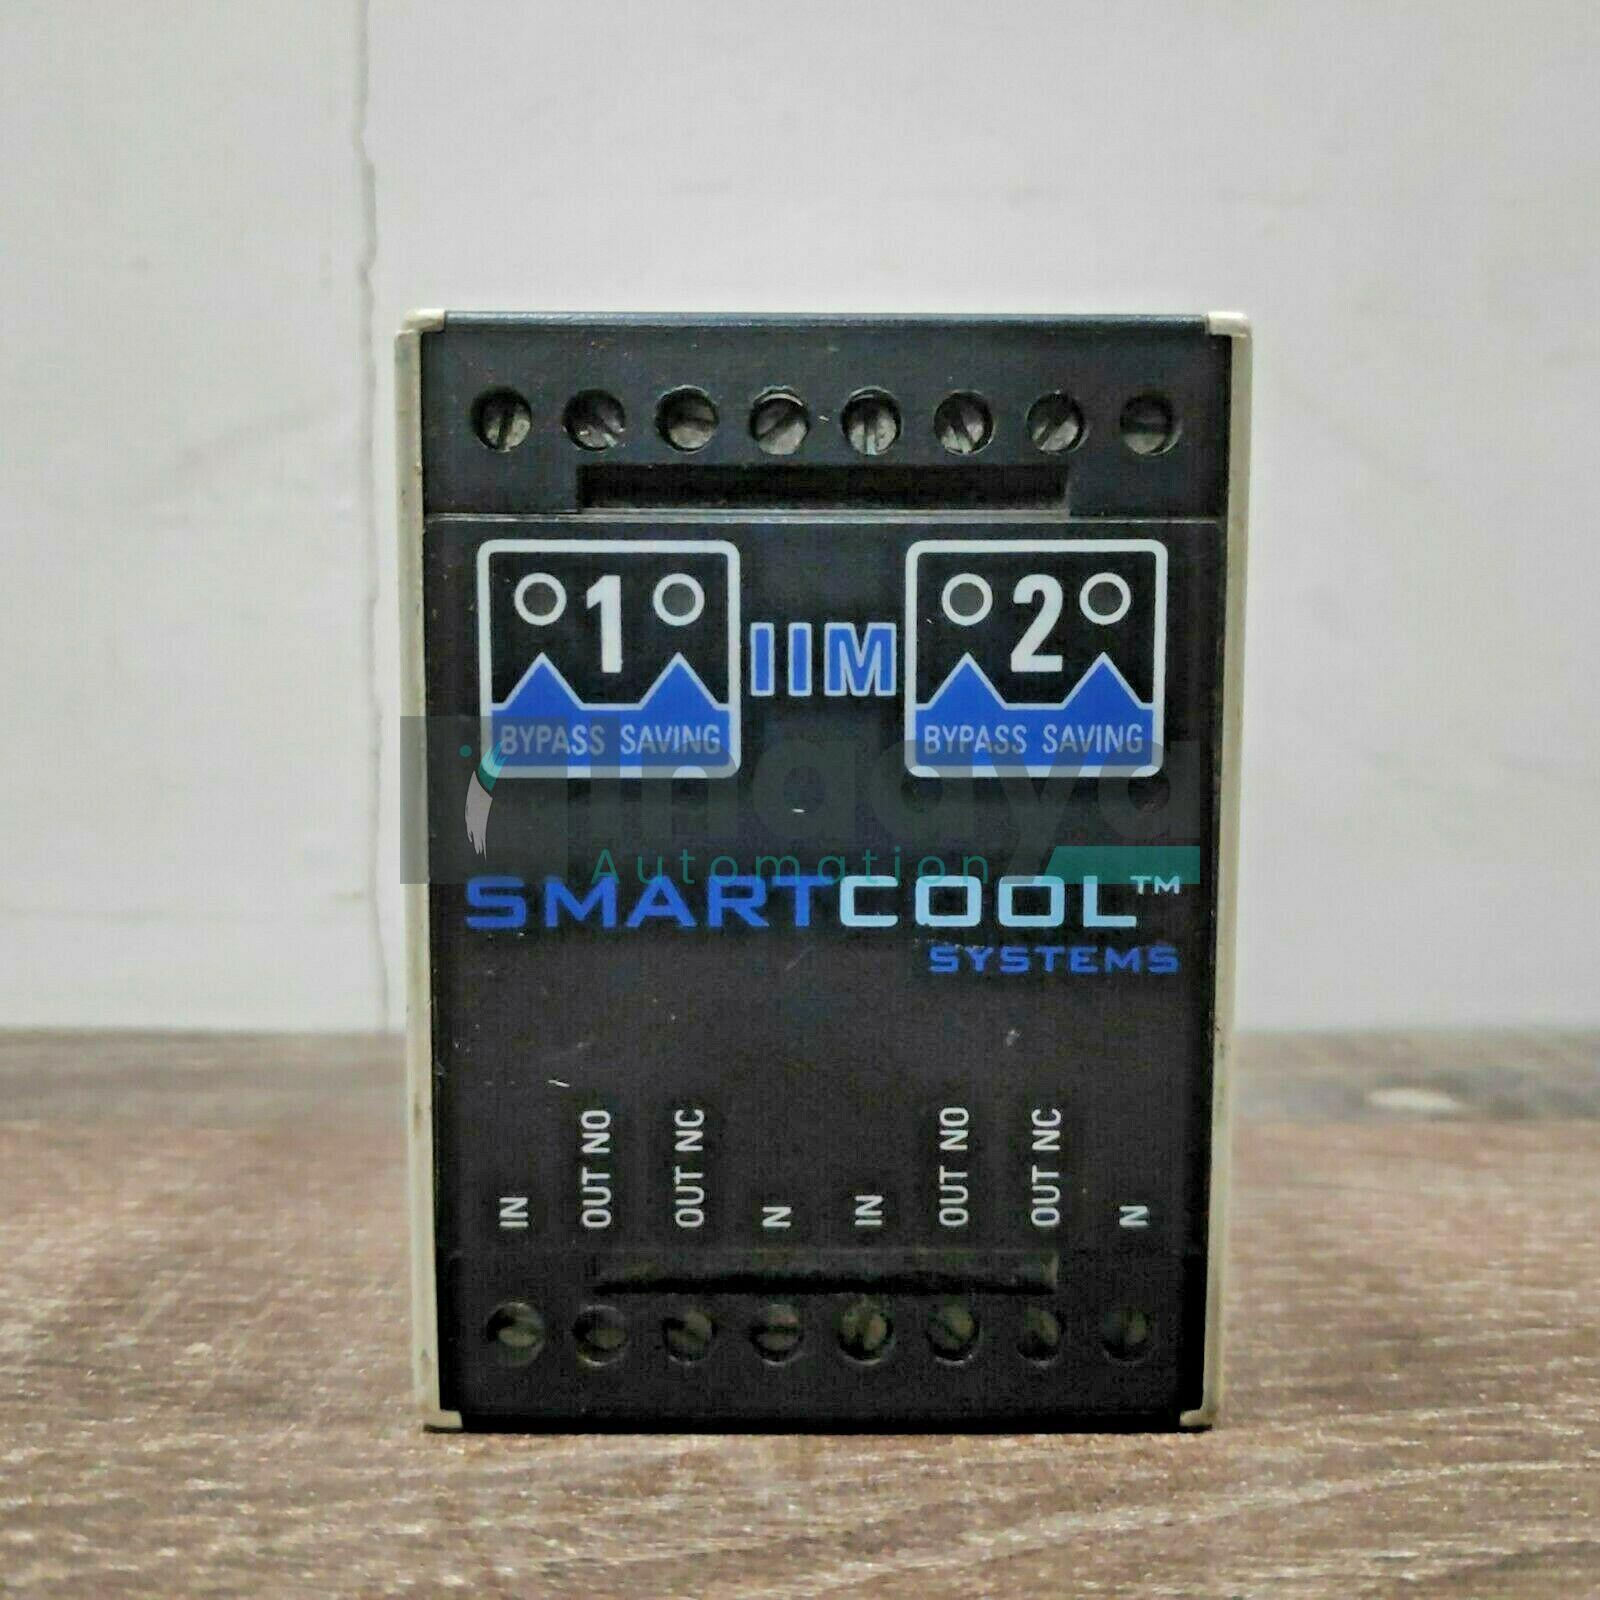 SMARTCOOL SYSTEMS SIM-06 ENERGY SAVING SYSTEM MODULE